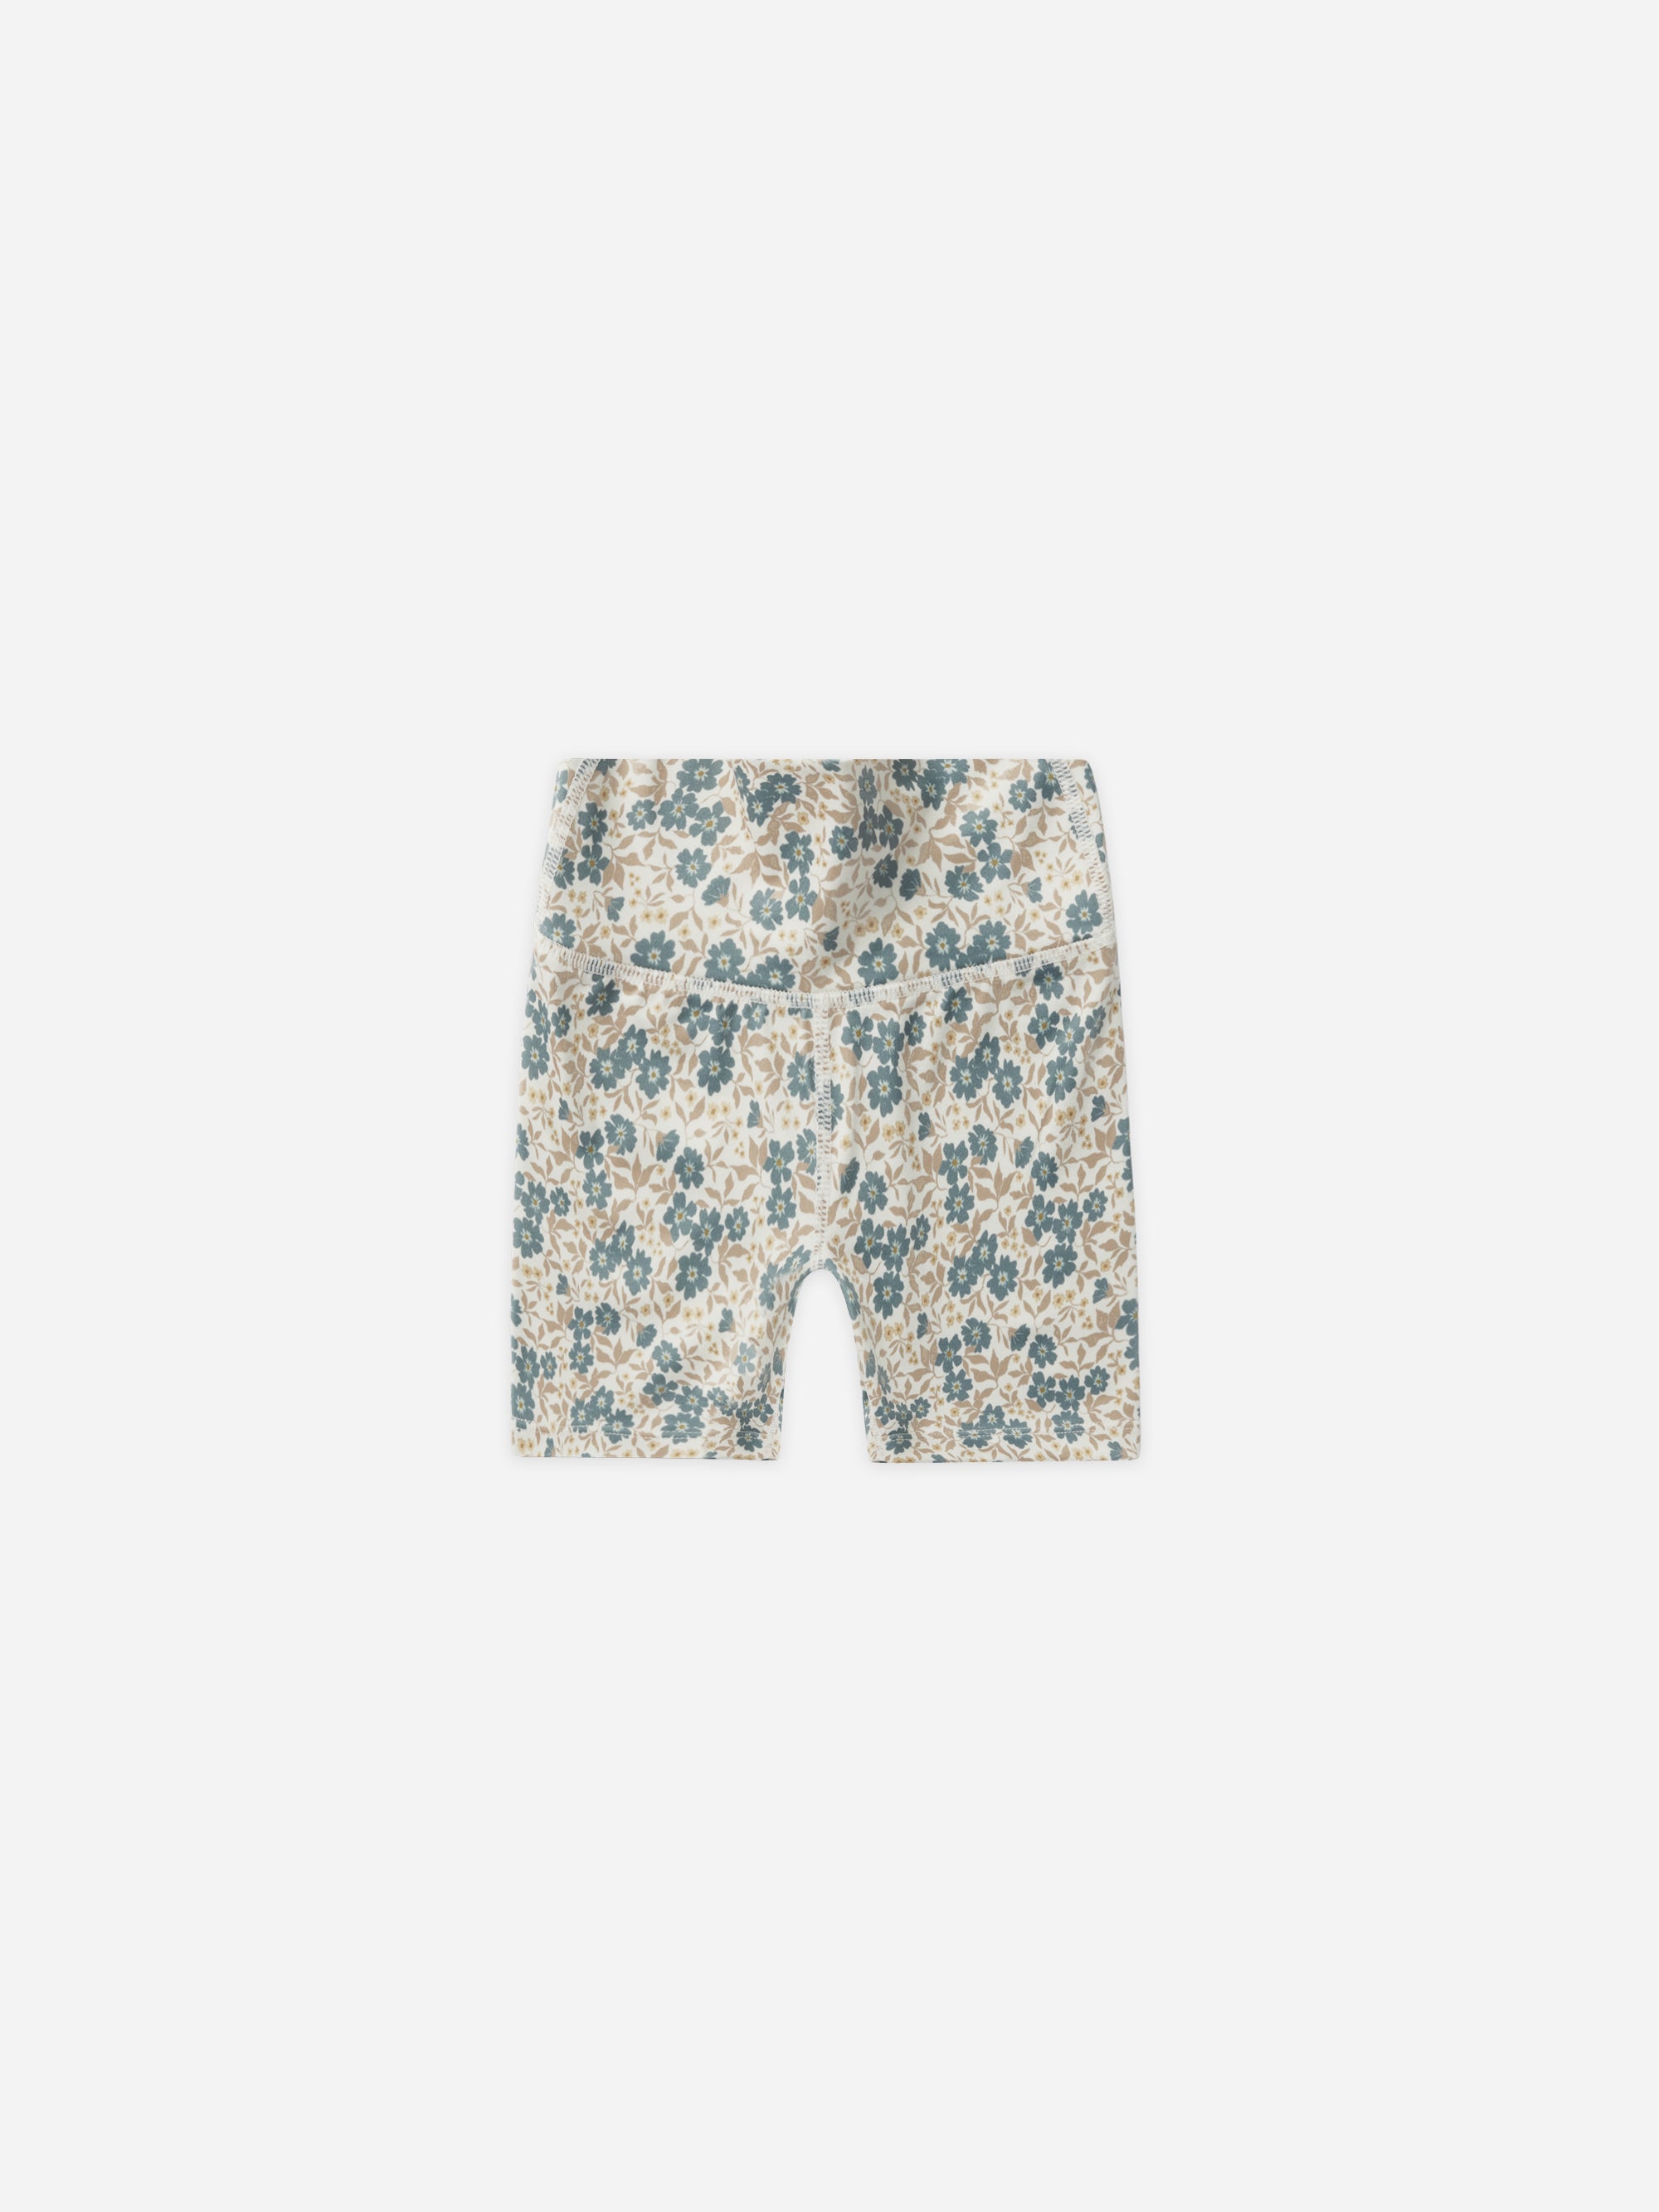 Bike Short || Blue Ditsy - Rylee + Cru | Kids Clothes | Trendy Baby Clothes | Modern Infant Outfits |